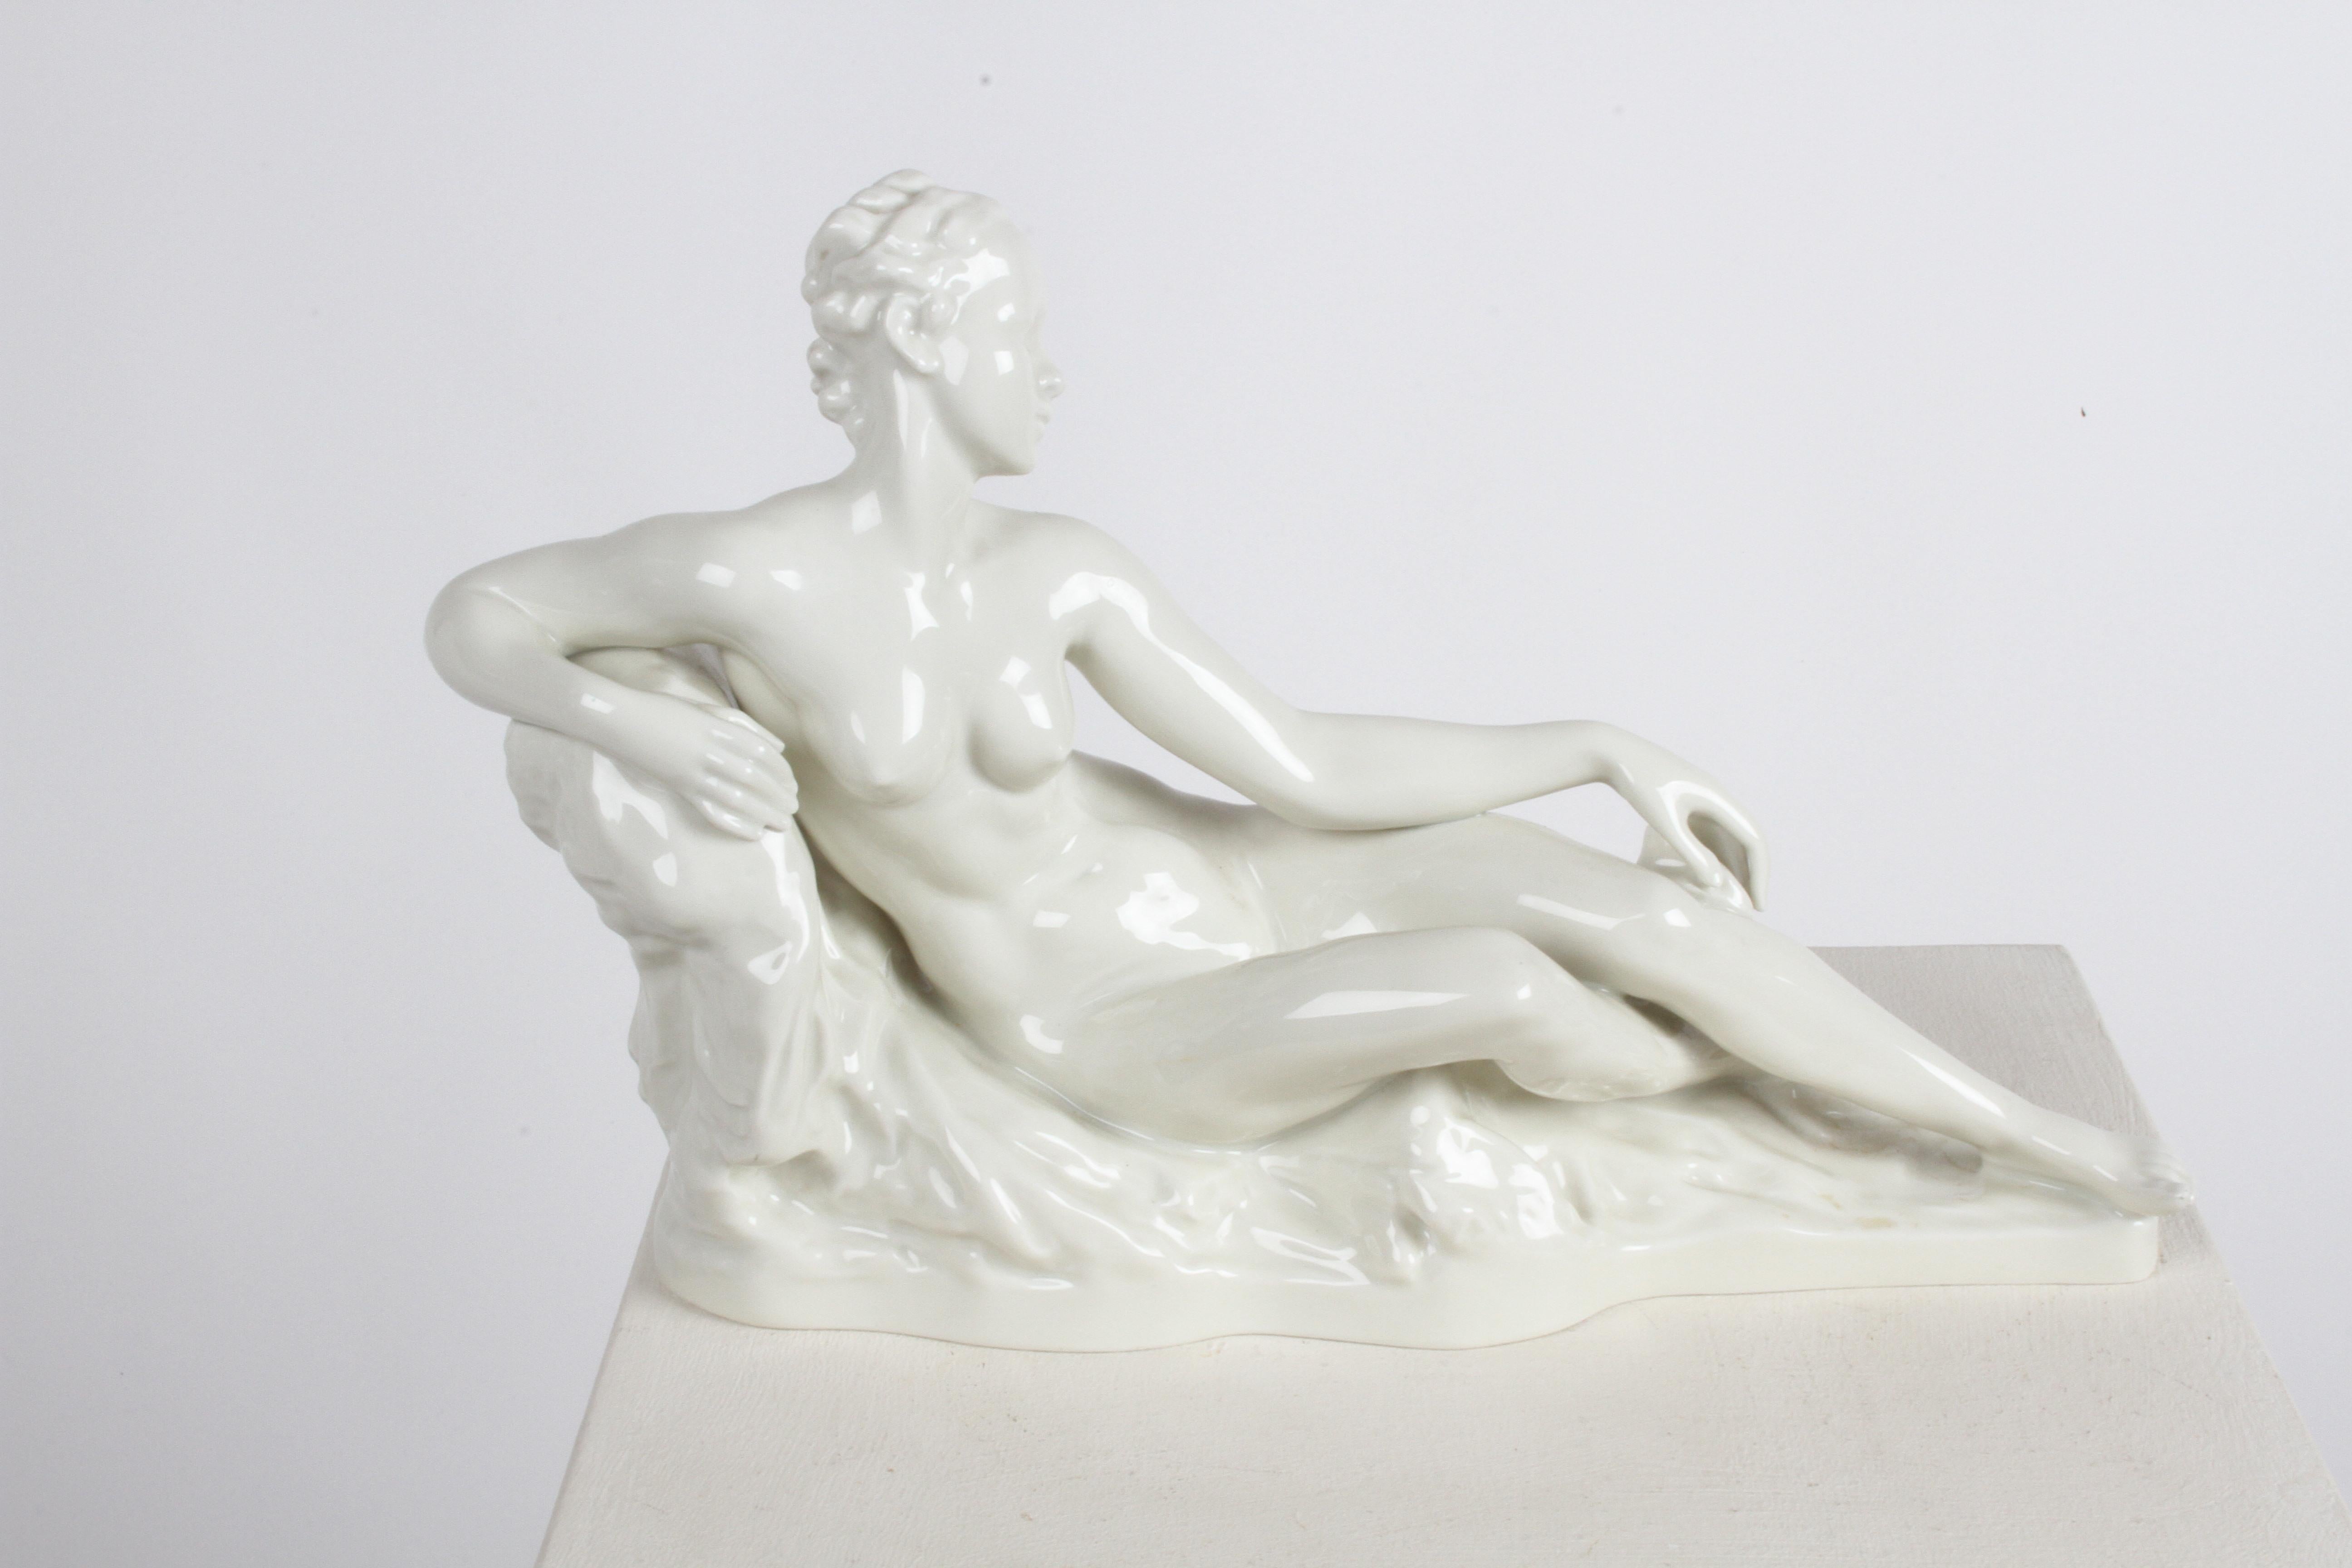 Large Rosenthal Germany porcelain c. 1934 reclining Art Deco nude figure by Gustav Adolph Bredow (1875-1950). Marked with green Rosenthal Germany, Kunstabteilung SELB to the bottom. Signed Bredow to the side pedestal. In fine condition, no damage